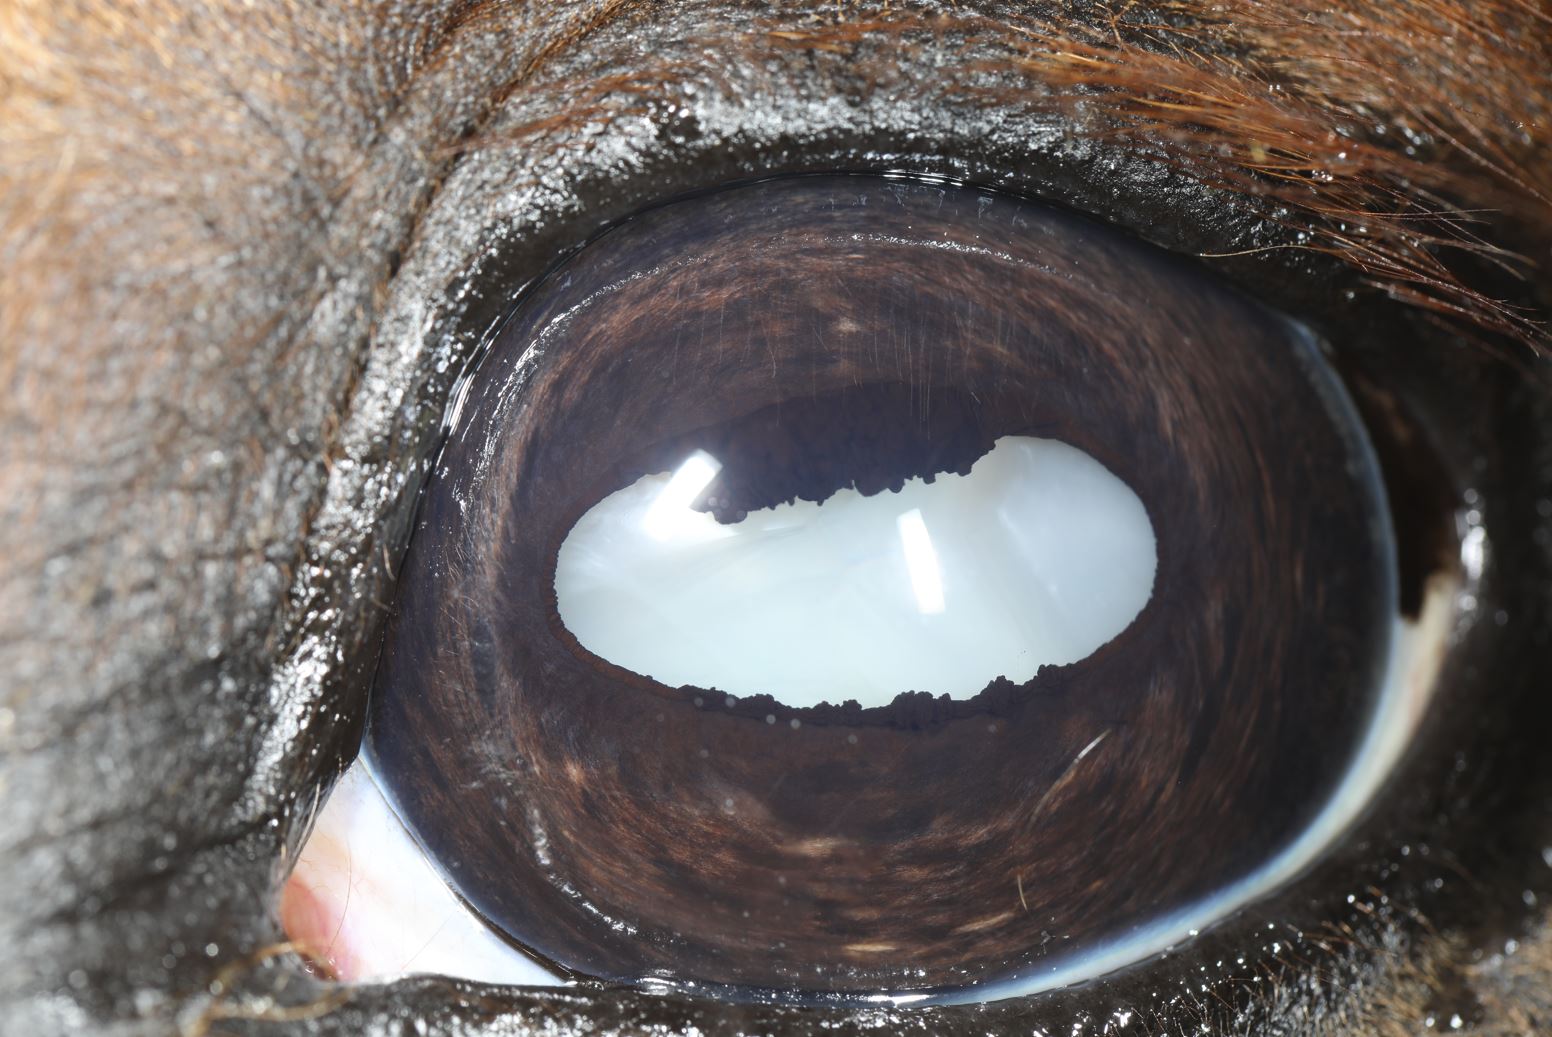 Closeup image of a horse's eye with cataracts.